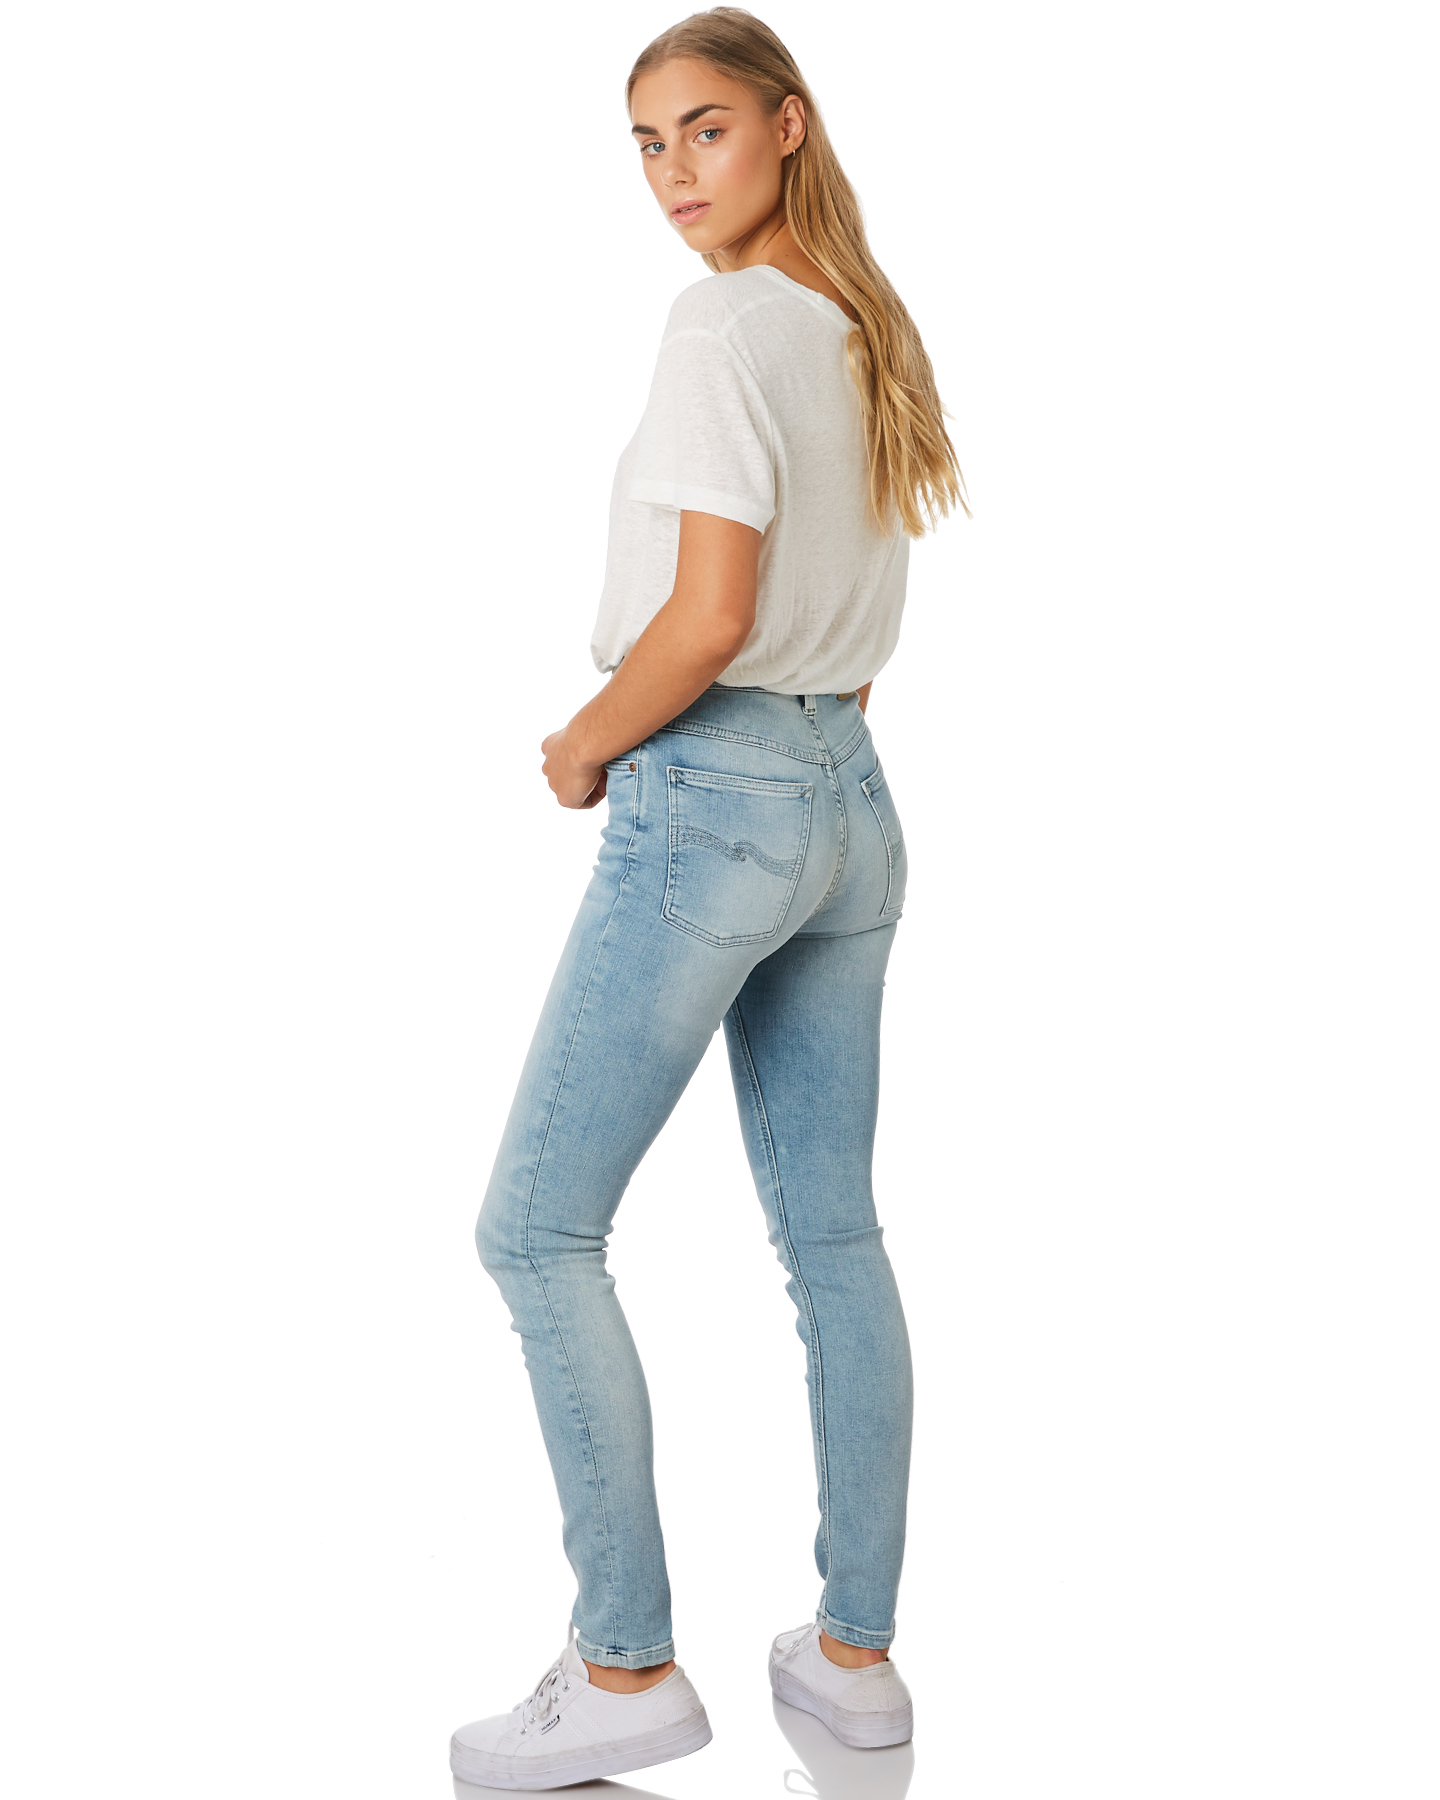 Womens Nudie Jeans Size Chart